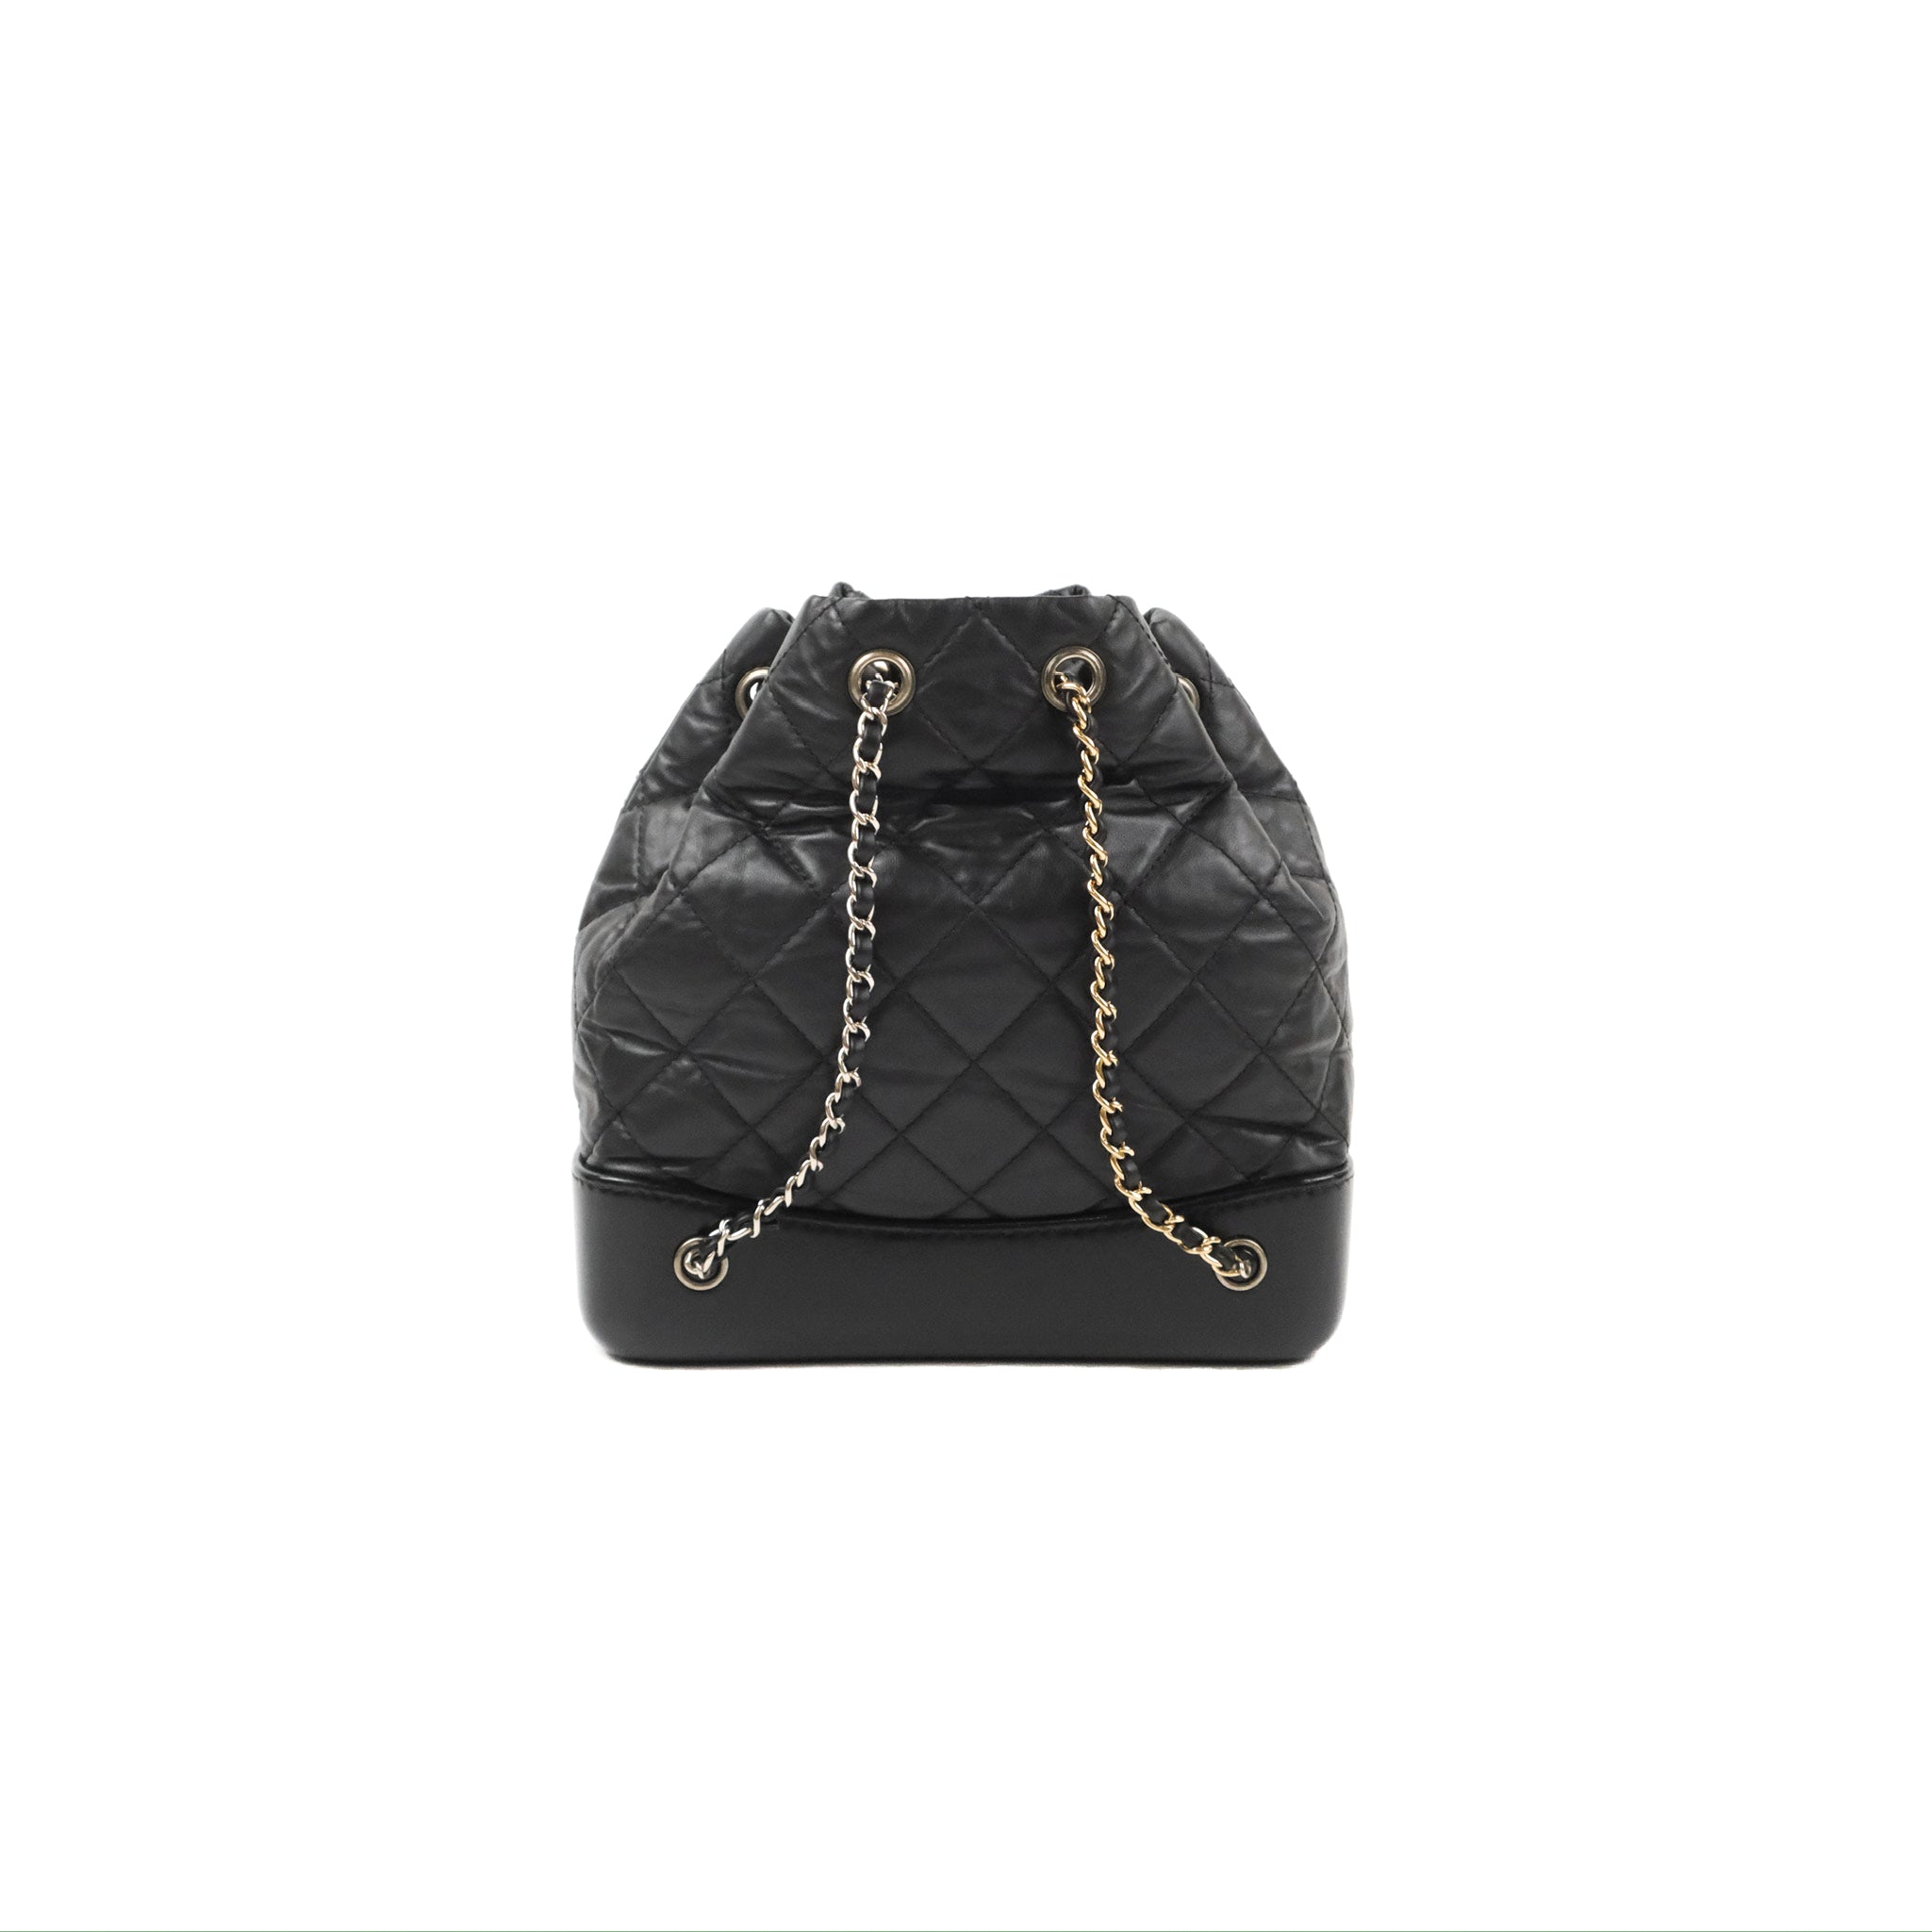 Chanel Small Black Aged Calfskin Gabrielle Backpack